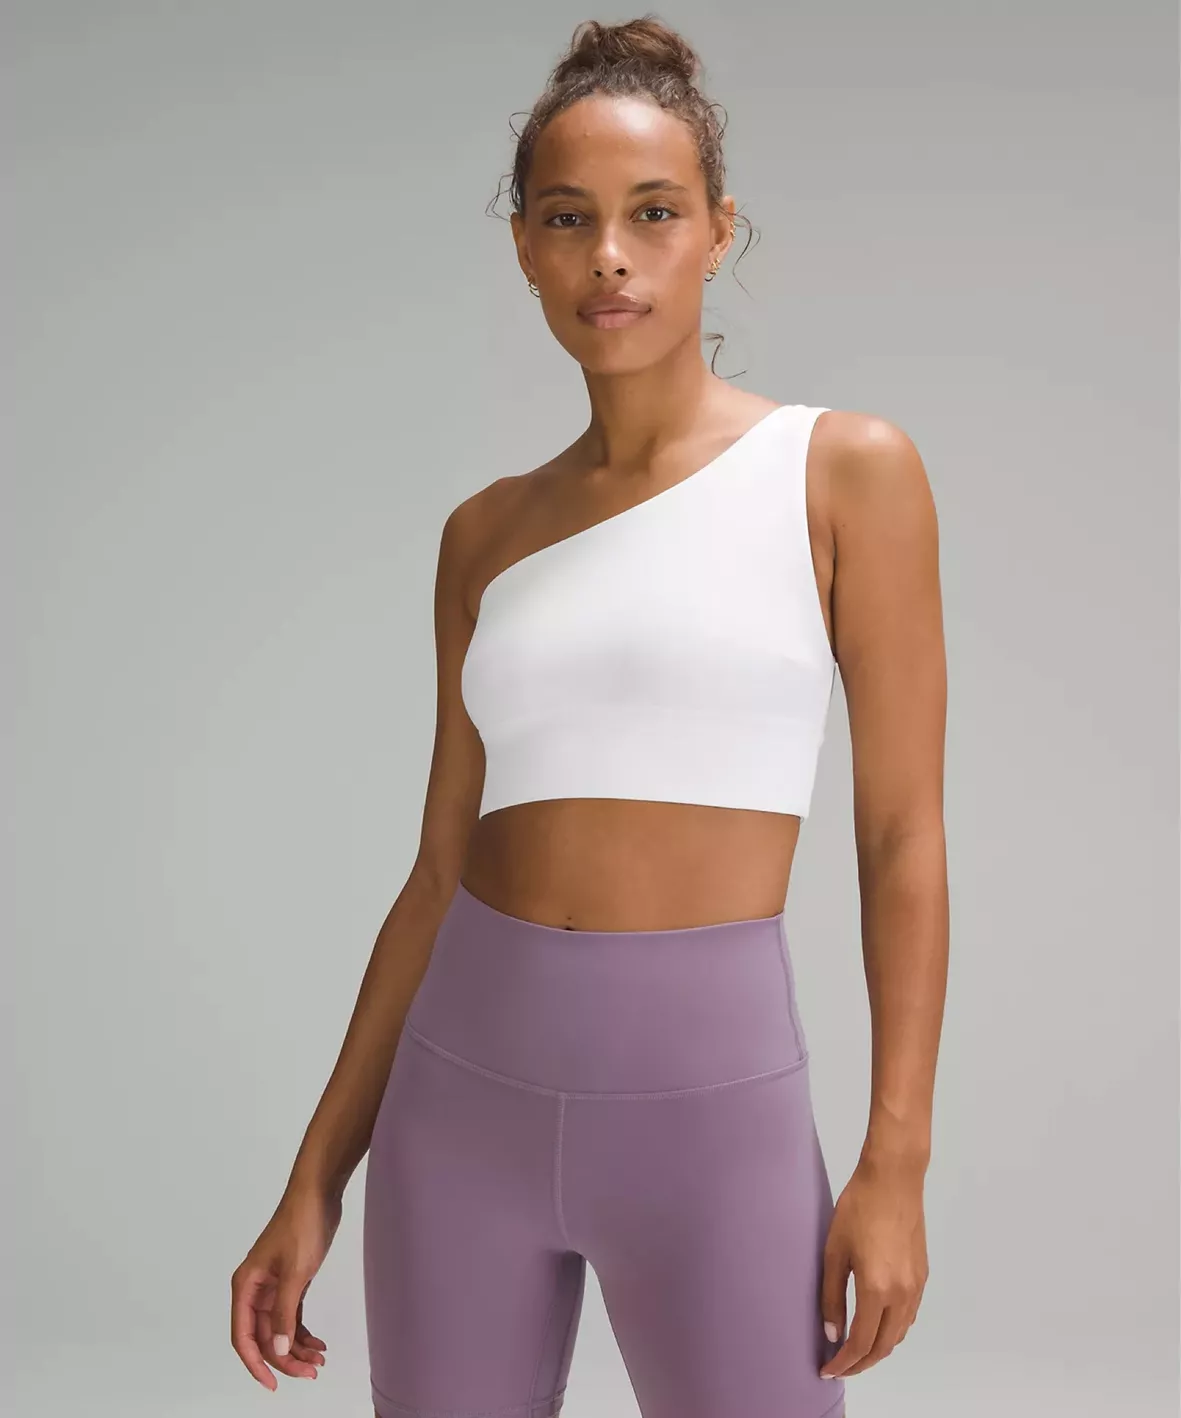 Athletic Wear Workout Set 2 Pieces Legging and top – PeachFit Sportswear